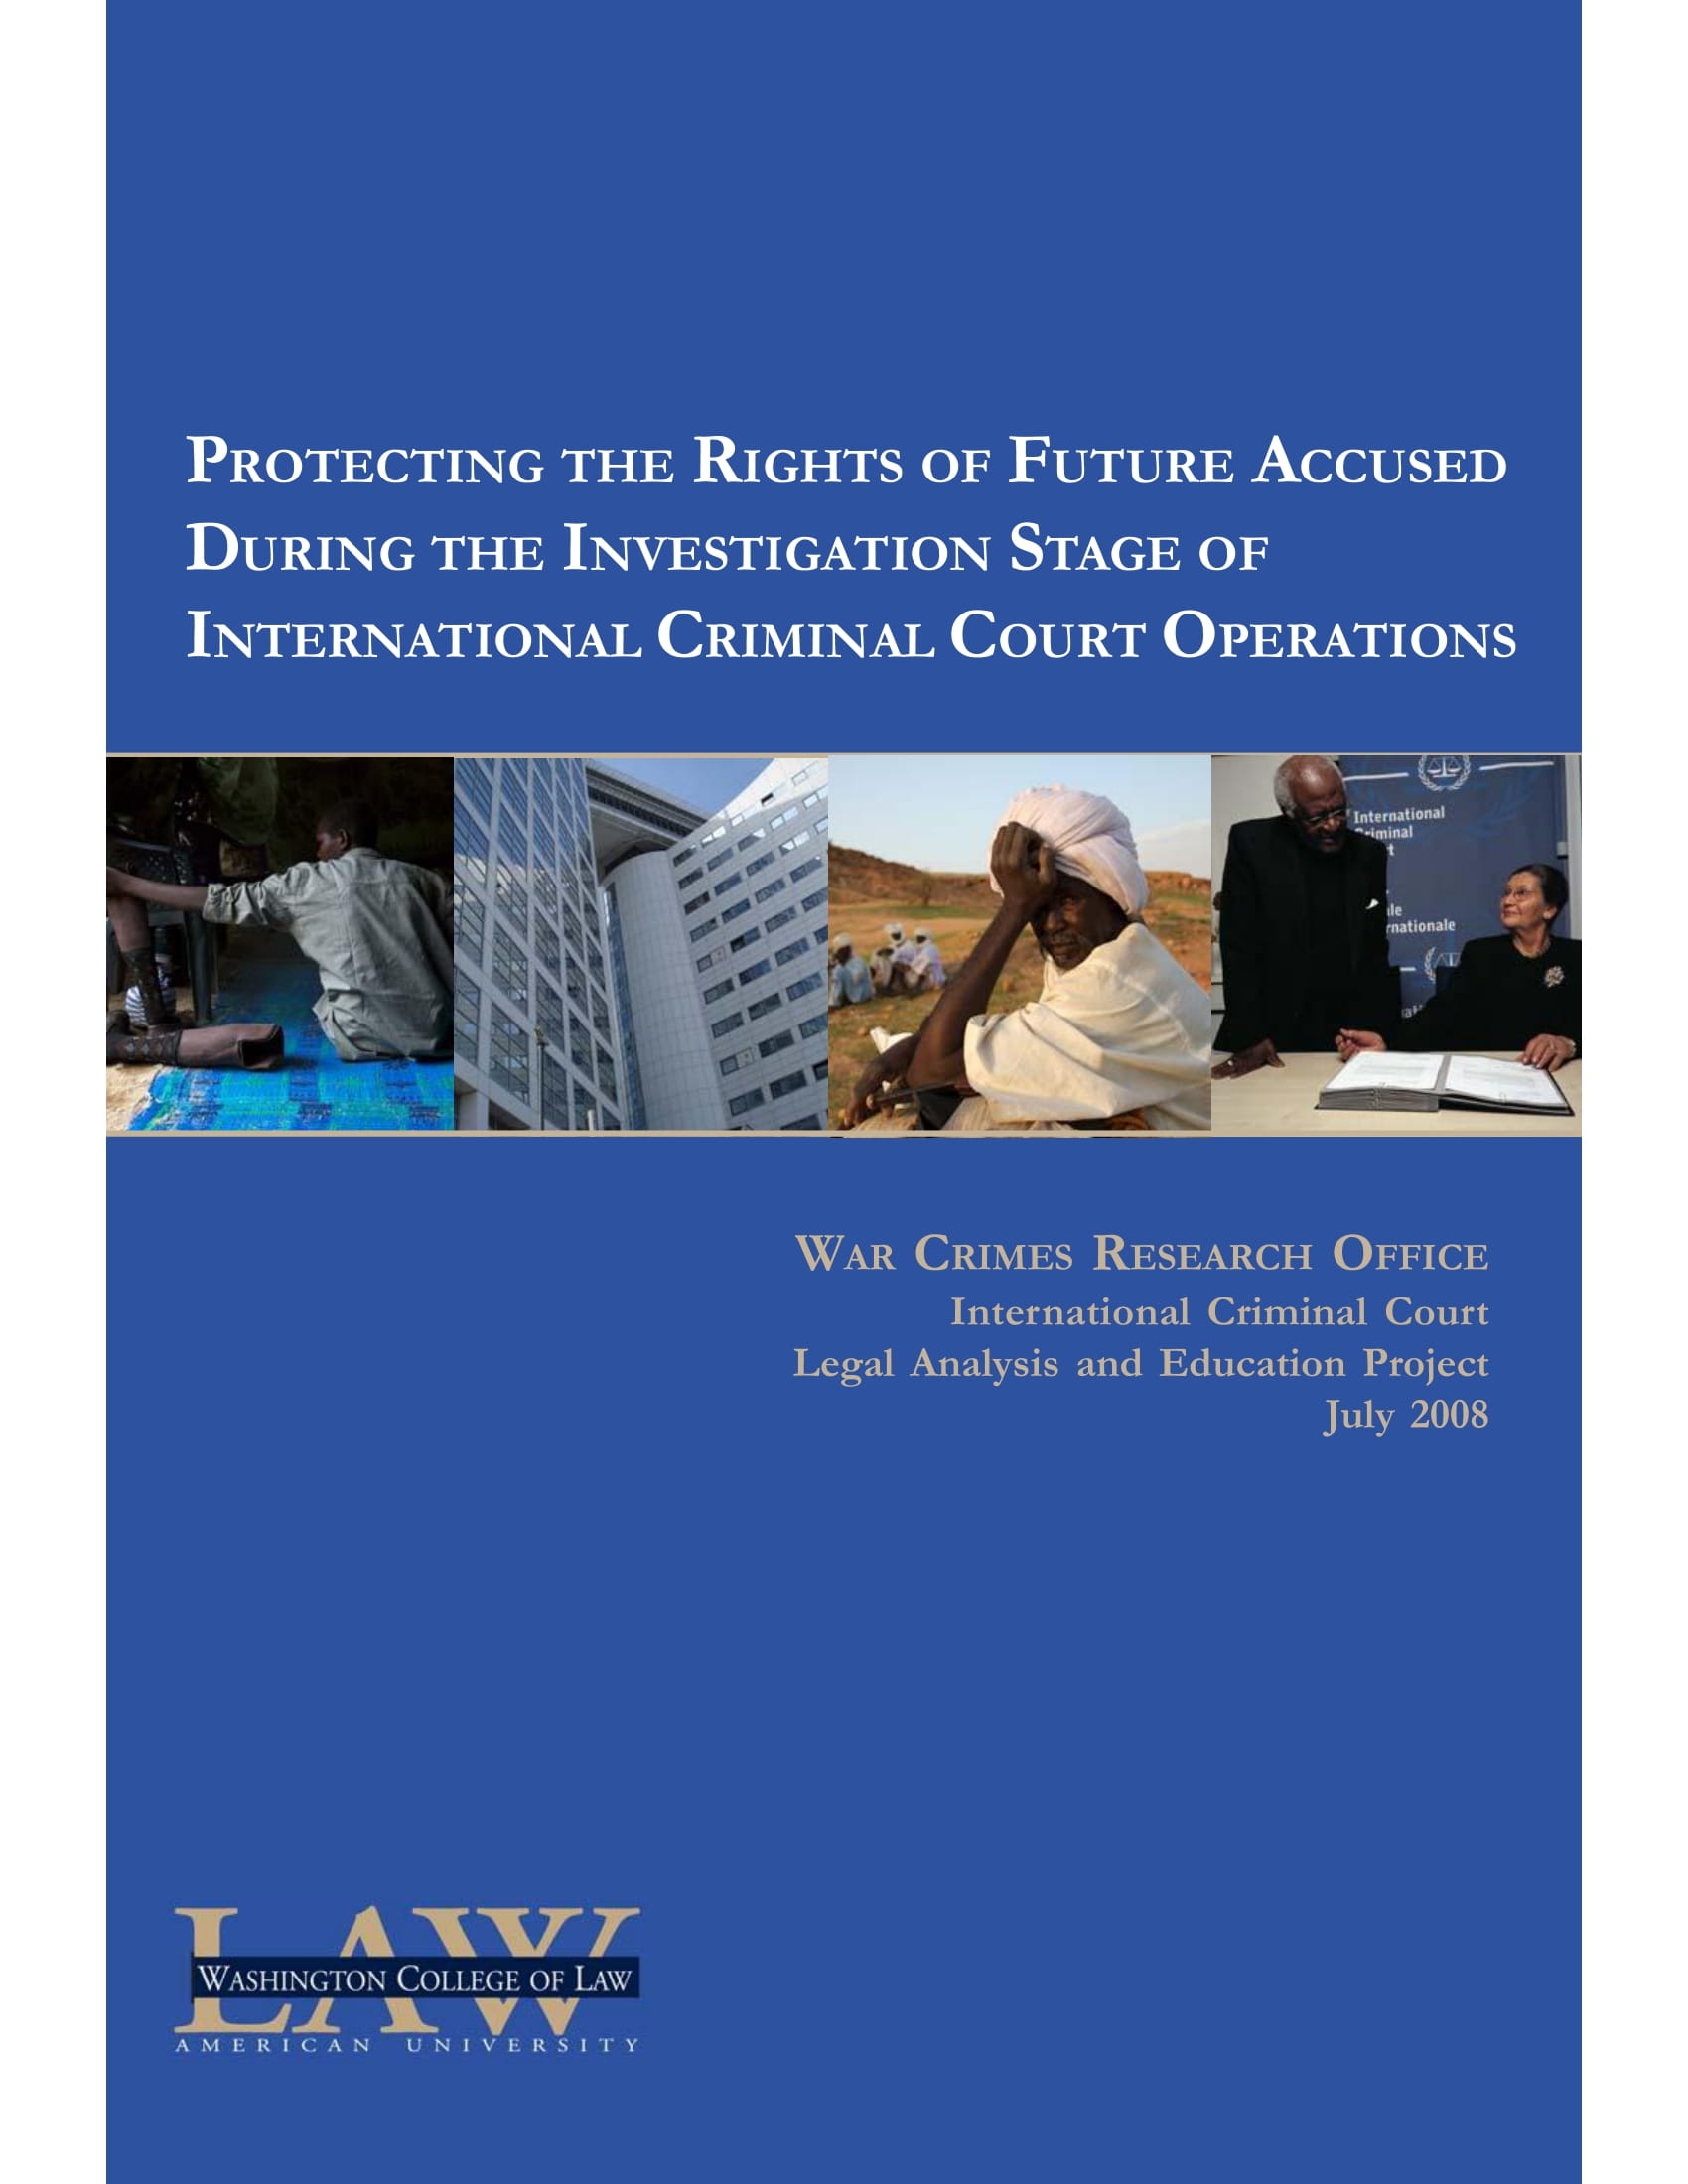 Report 4: Protecting the Rights of Future Accused During the Investigation Stage of International Criminal Court Operations